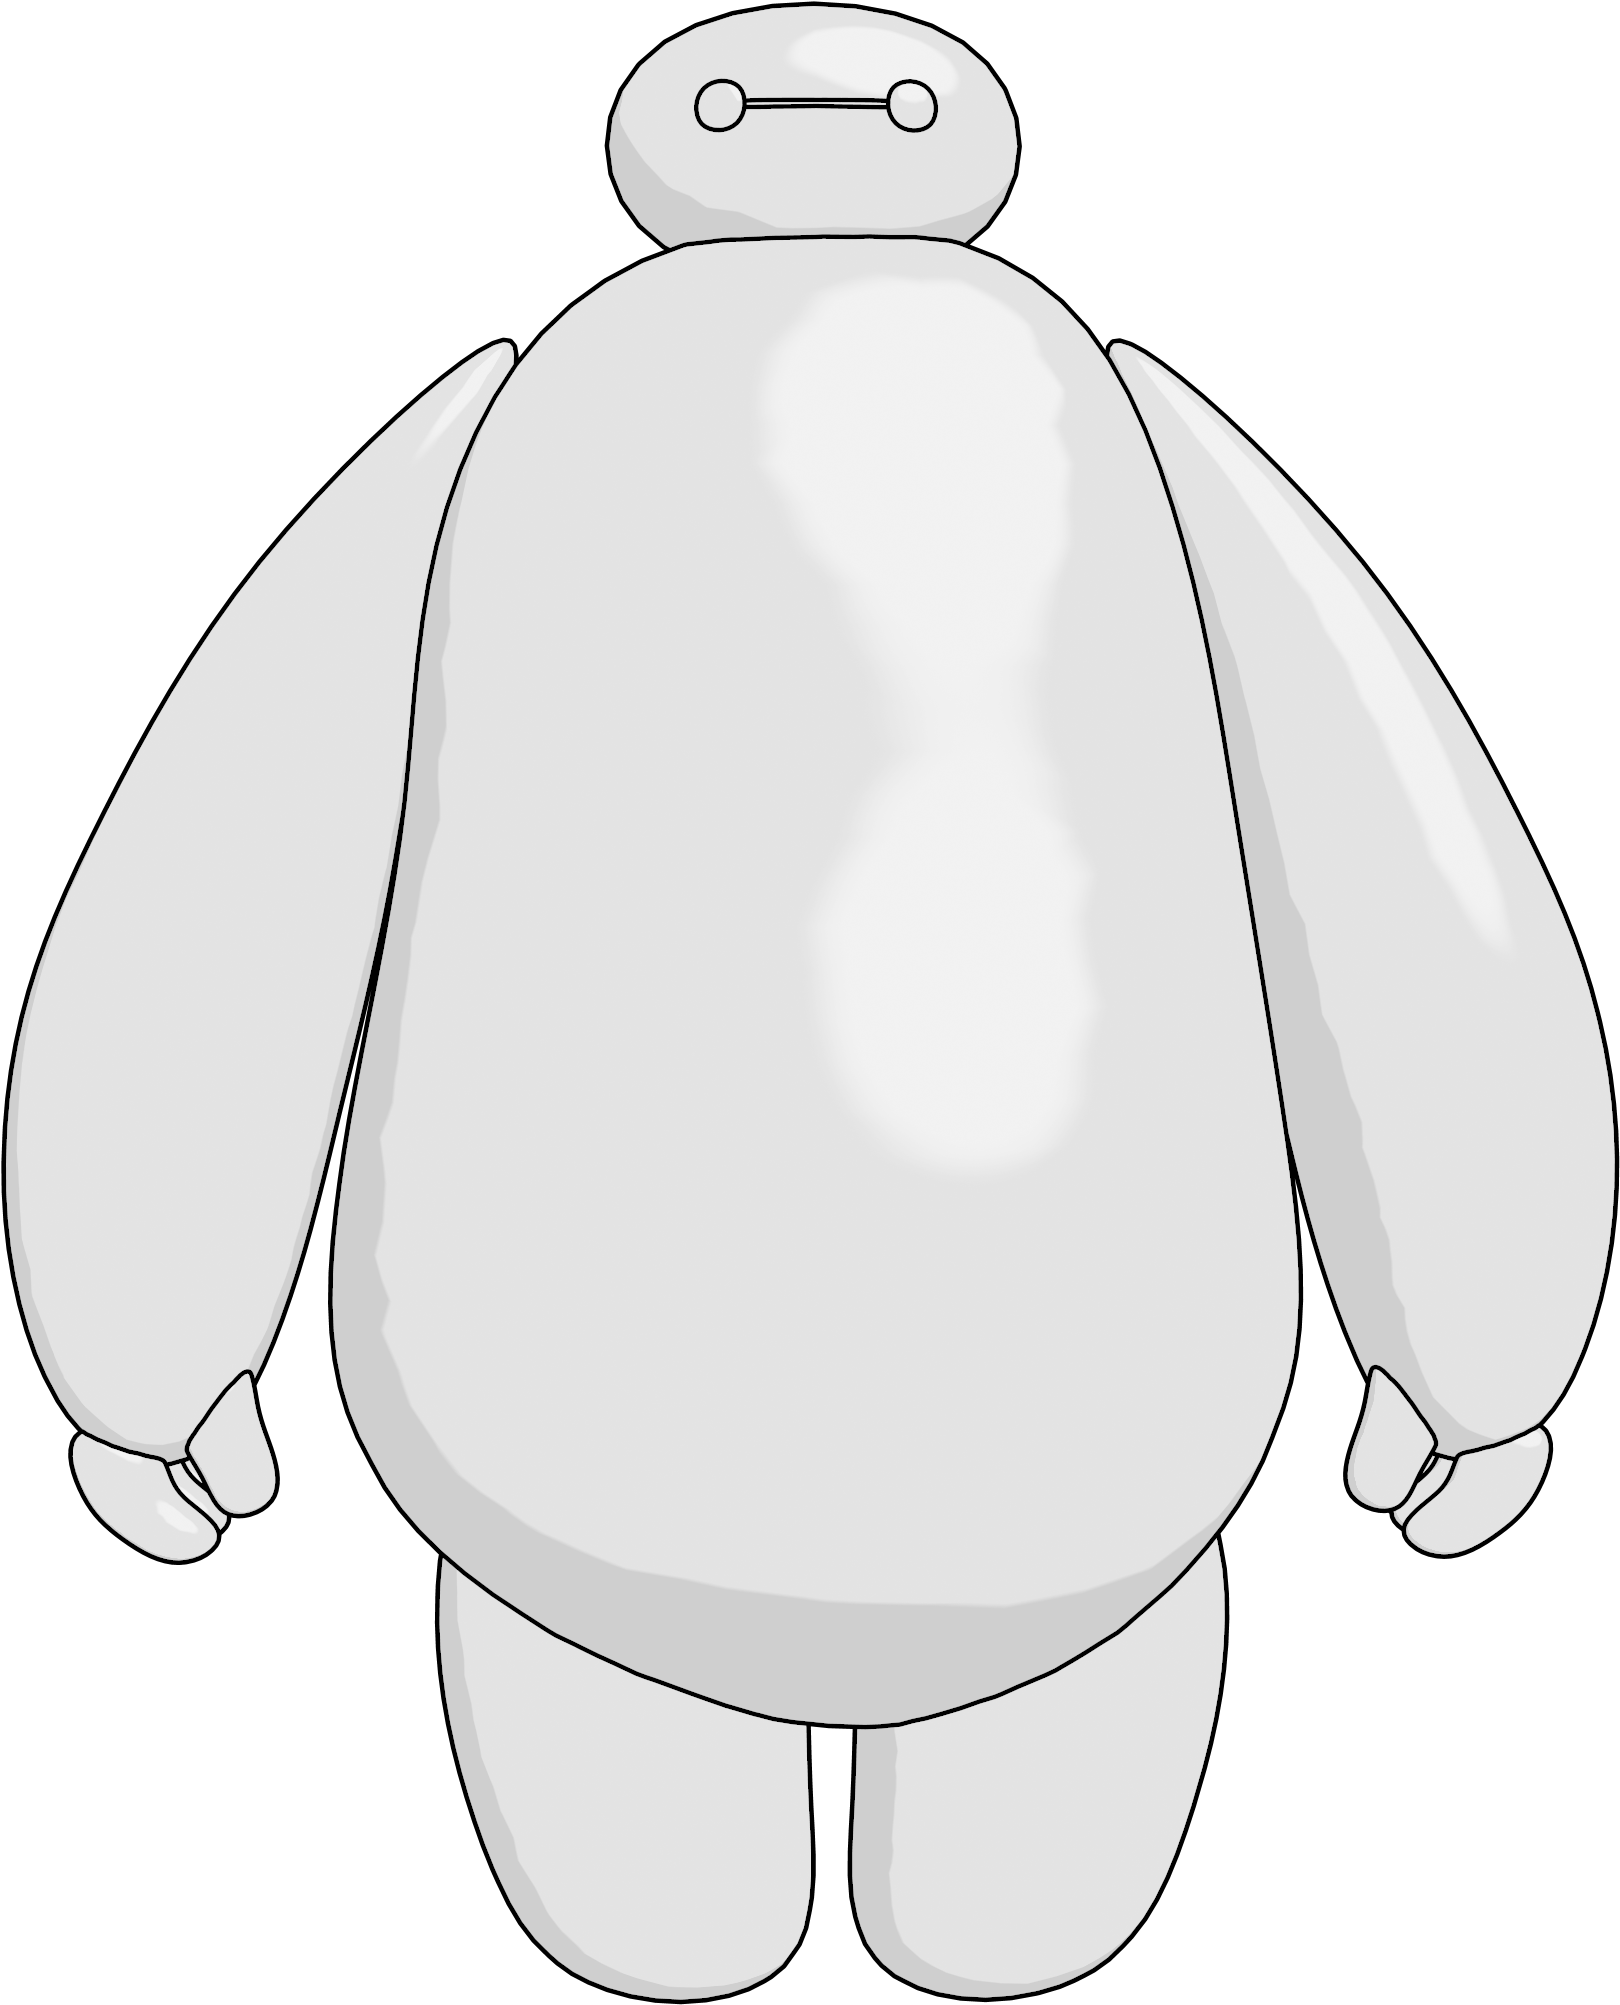 Free Baymax Black And White Download Free Baymax Black And White Png